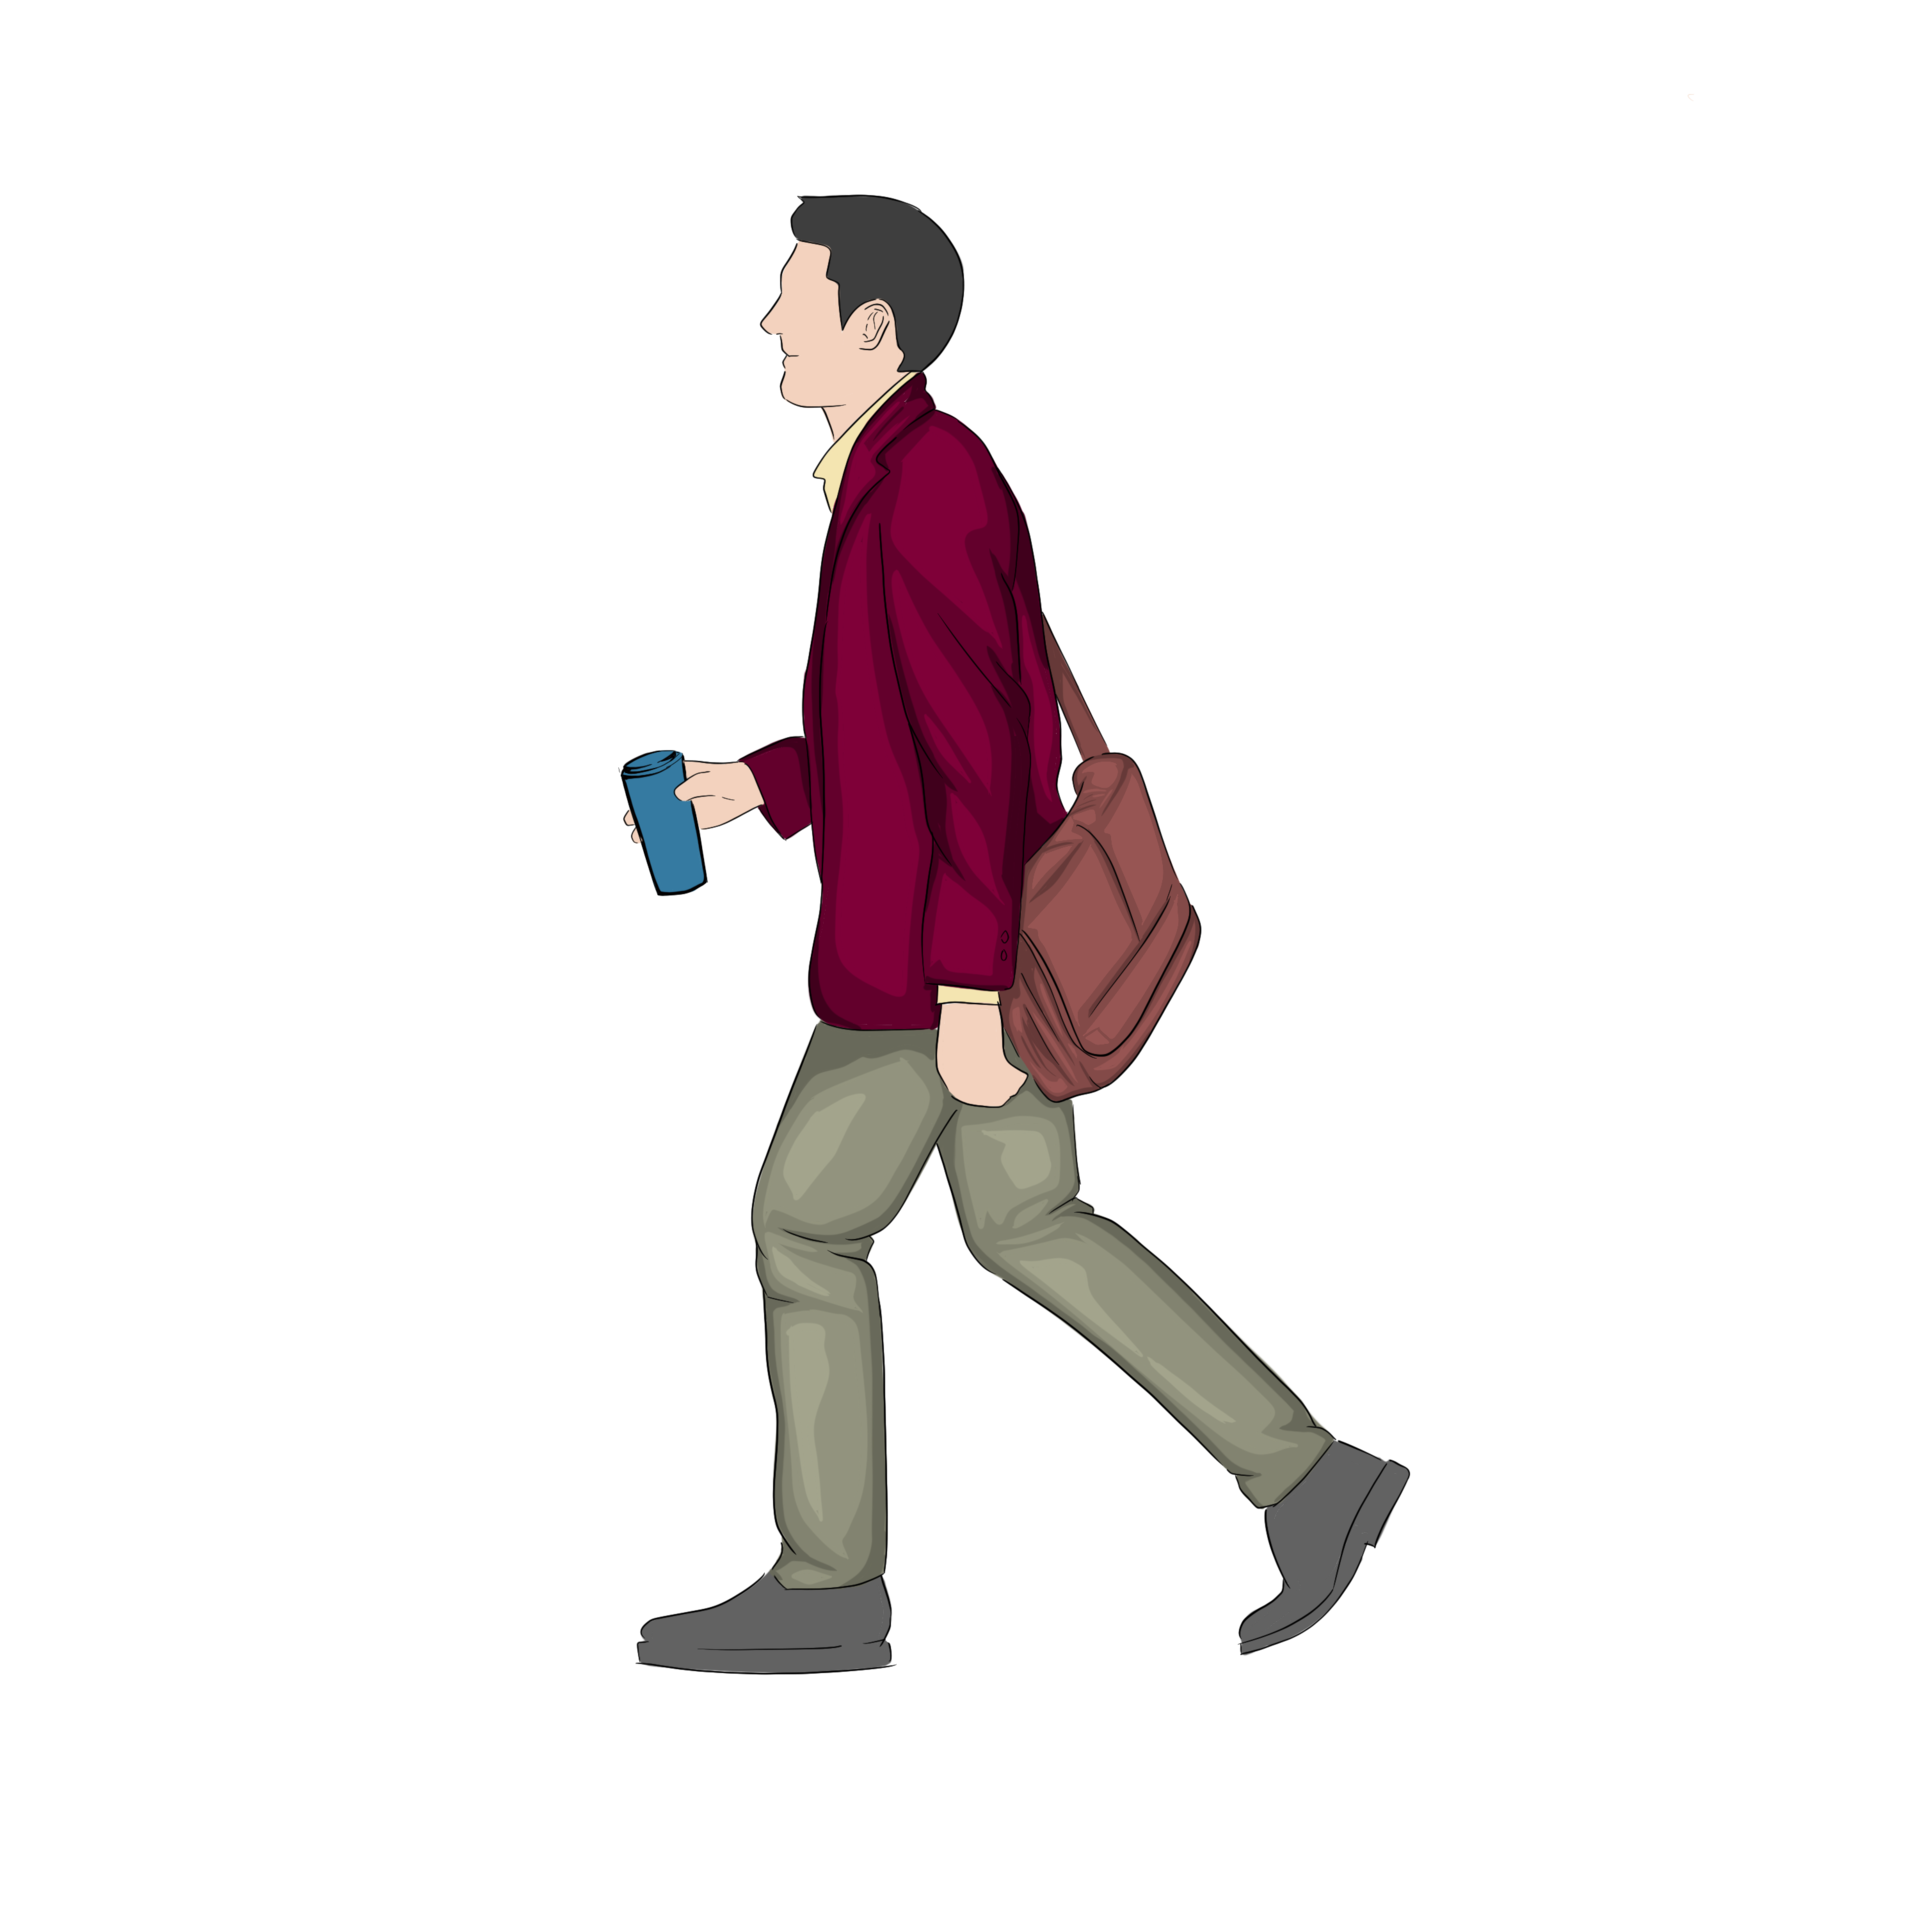 https://www.pngall.com/wp-content/uploads/14/People-Walking-PNG.png